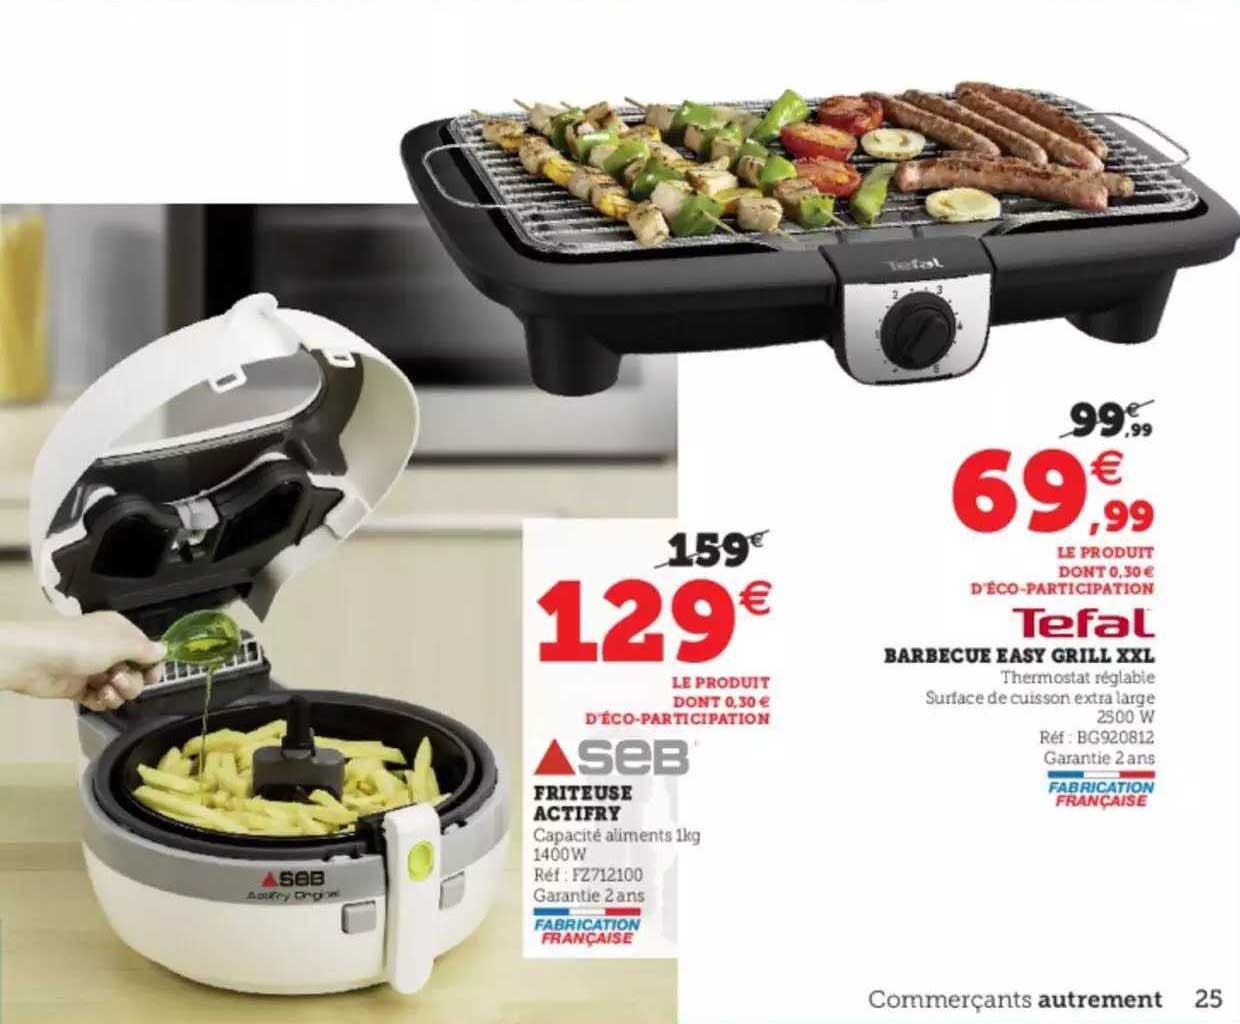 Promo Friteuse Actifry chez Carrefour